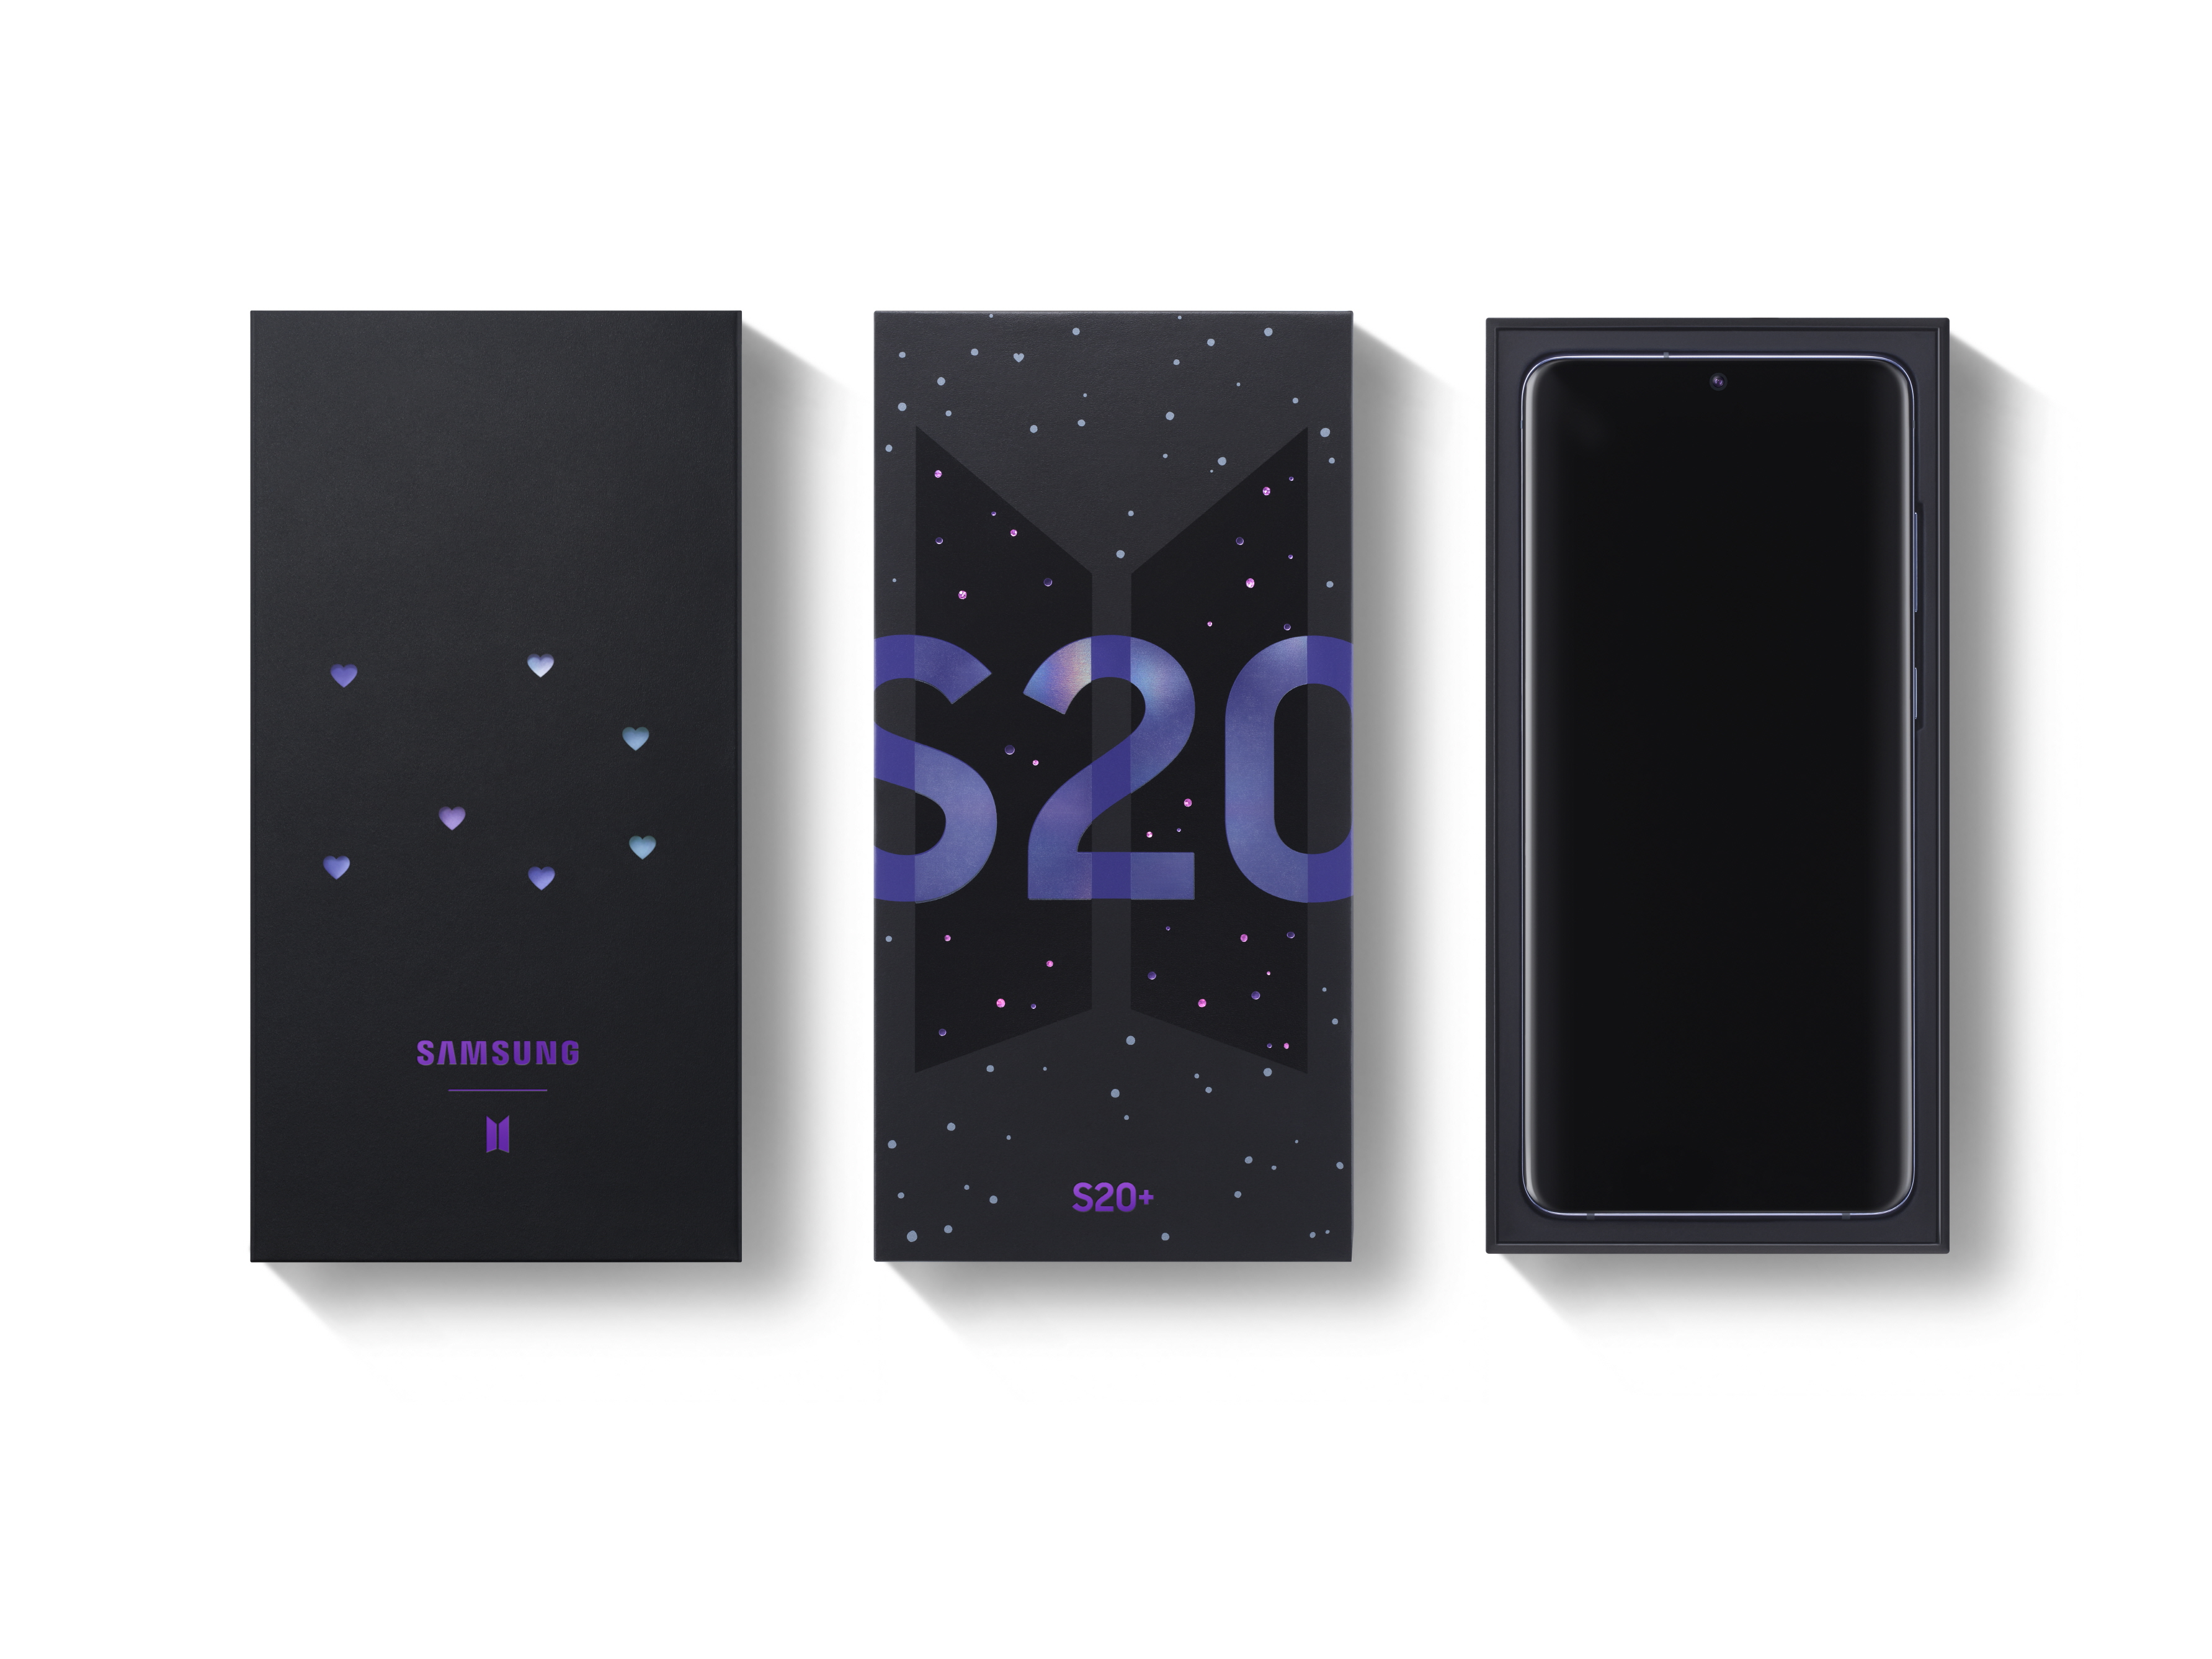 I Purple You: Introducing Samsung Galaxy S20+ 5G, S20+ and Galaxy Buds+ BTS  Editions - Samsung Newsroom Global Media Library